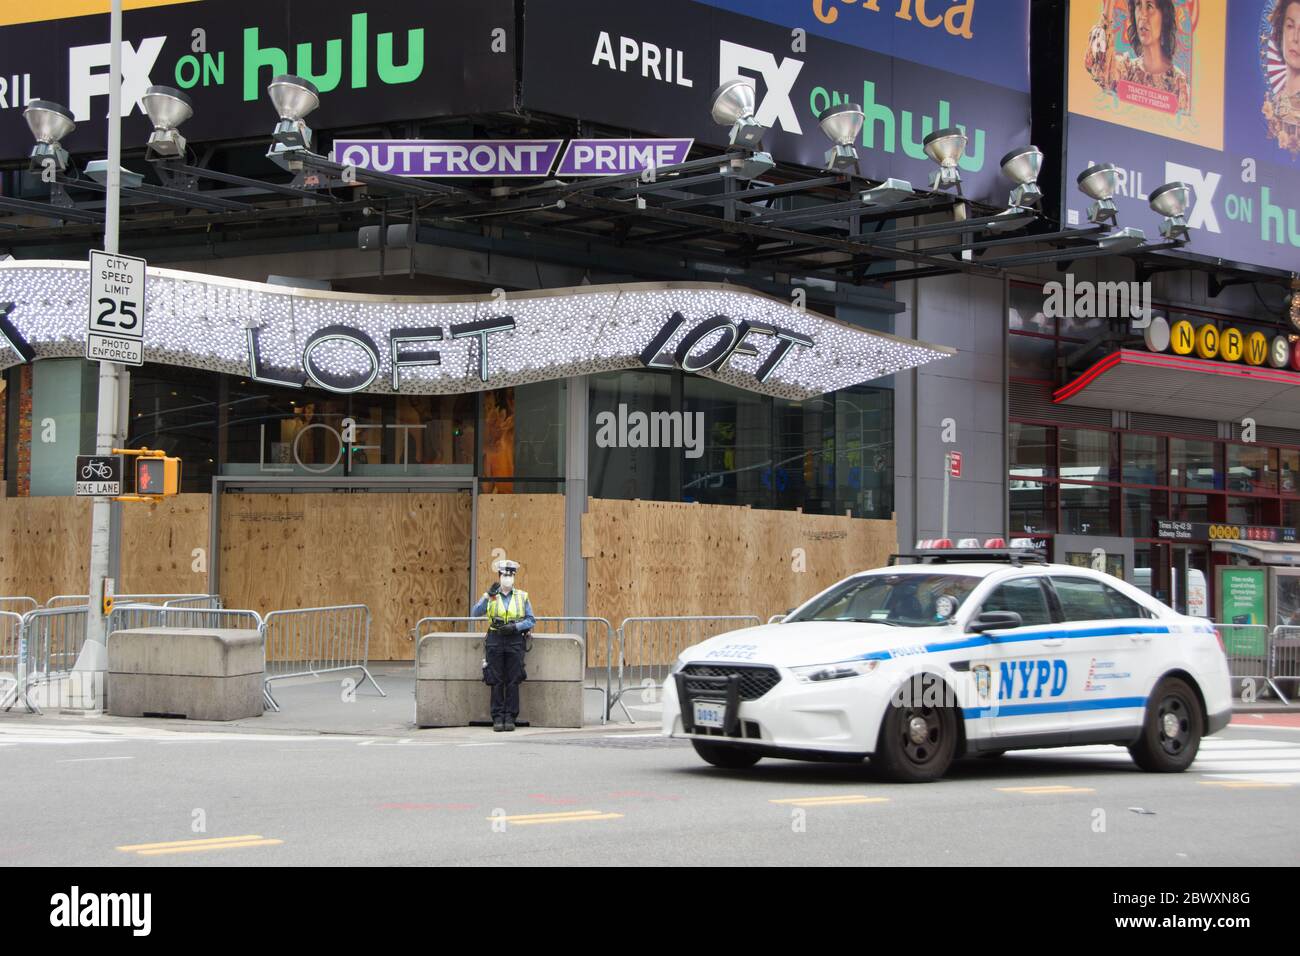 Loft store in Times Square boarded for protection due to looting at the protest. Stock Photo